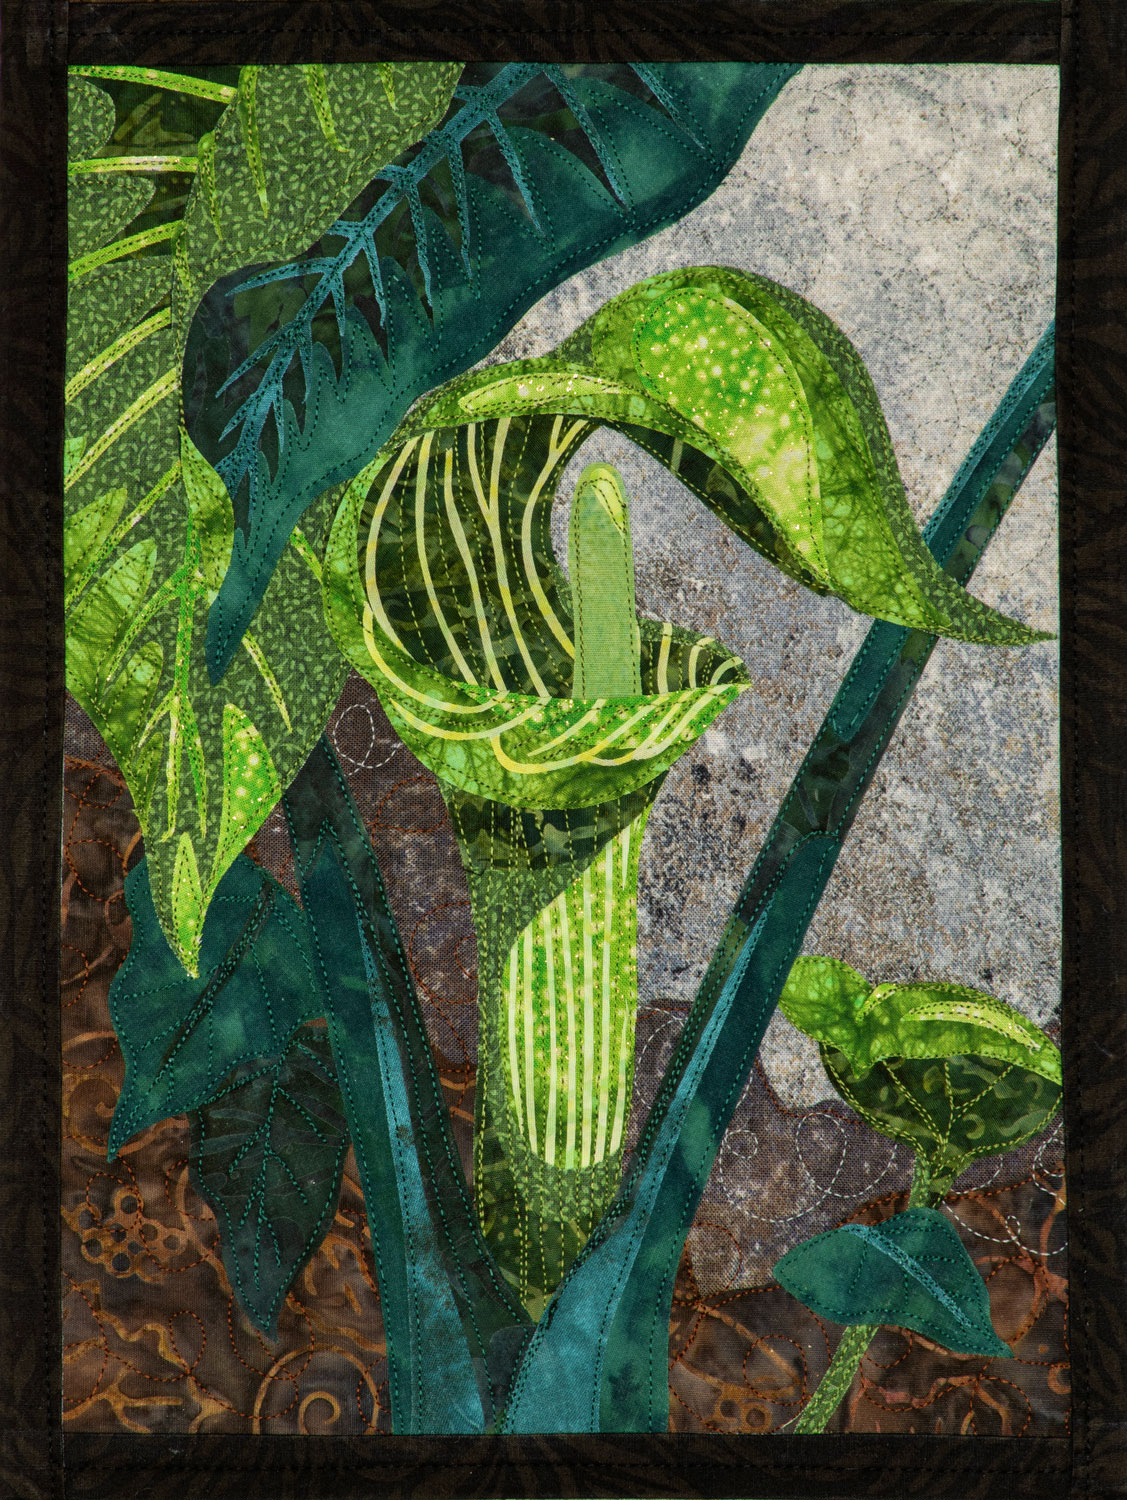 Jack-in-the-Pulpit Wall Hanging, Complete